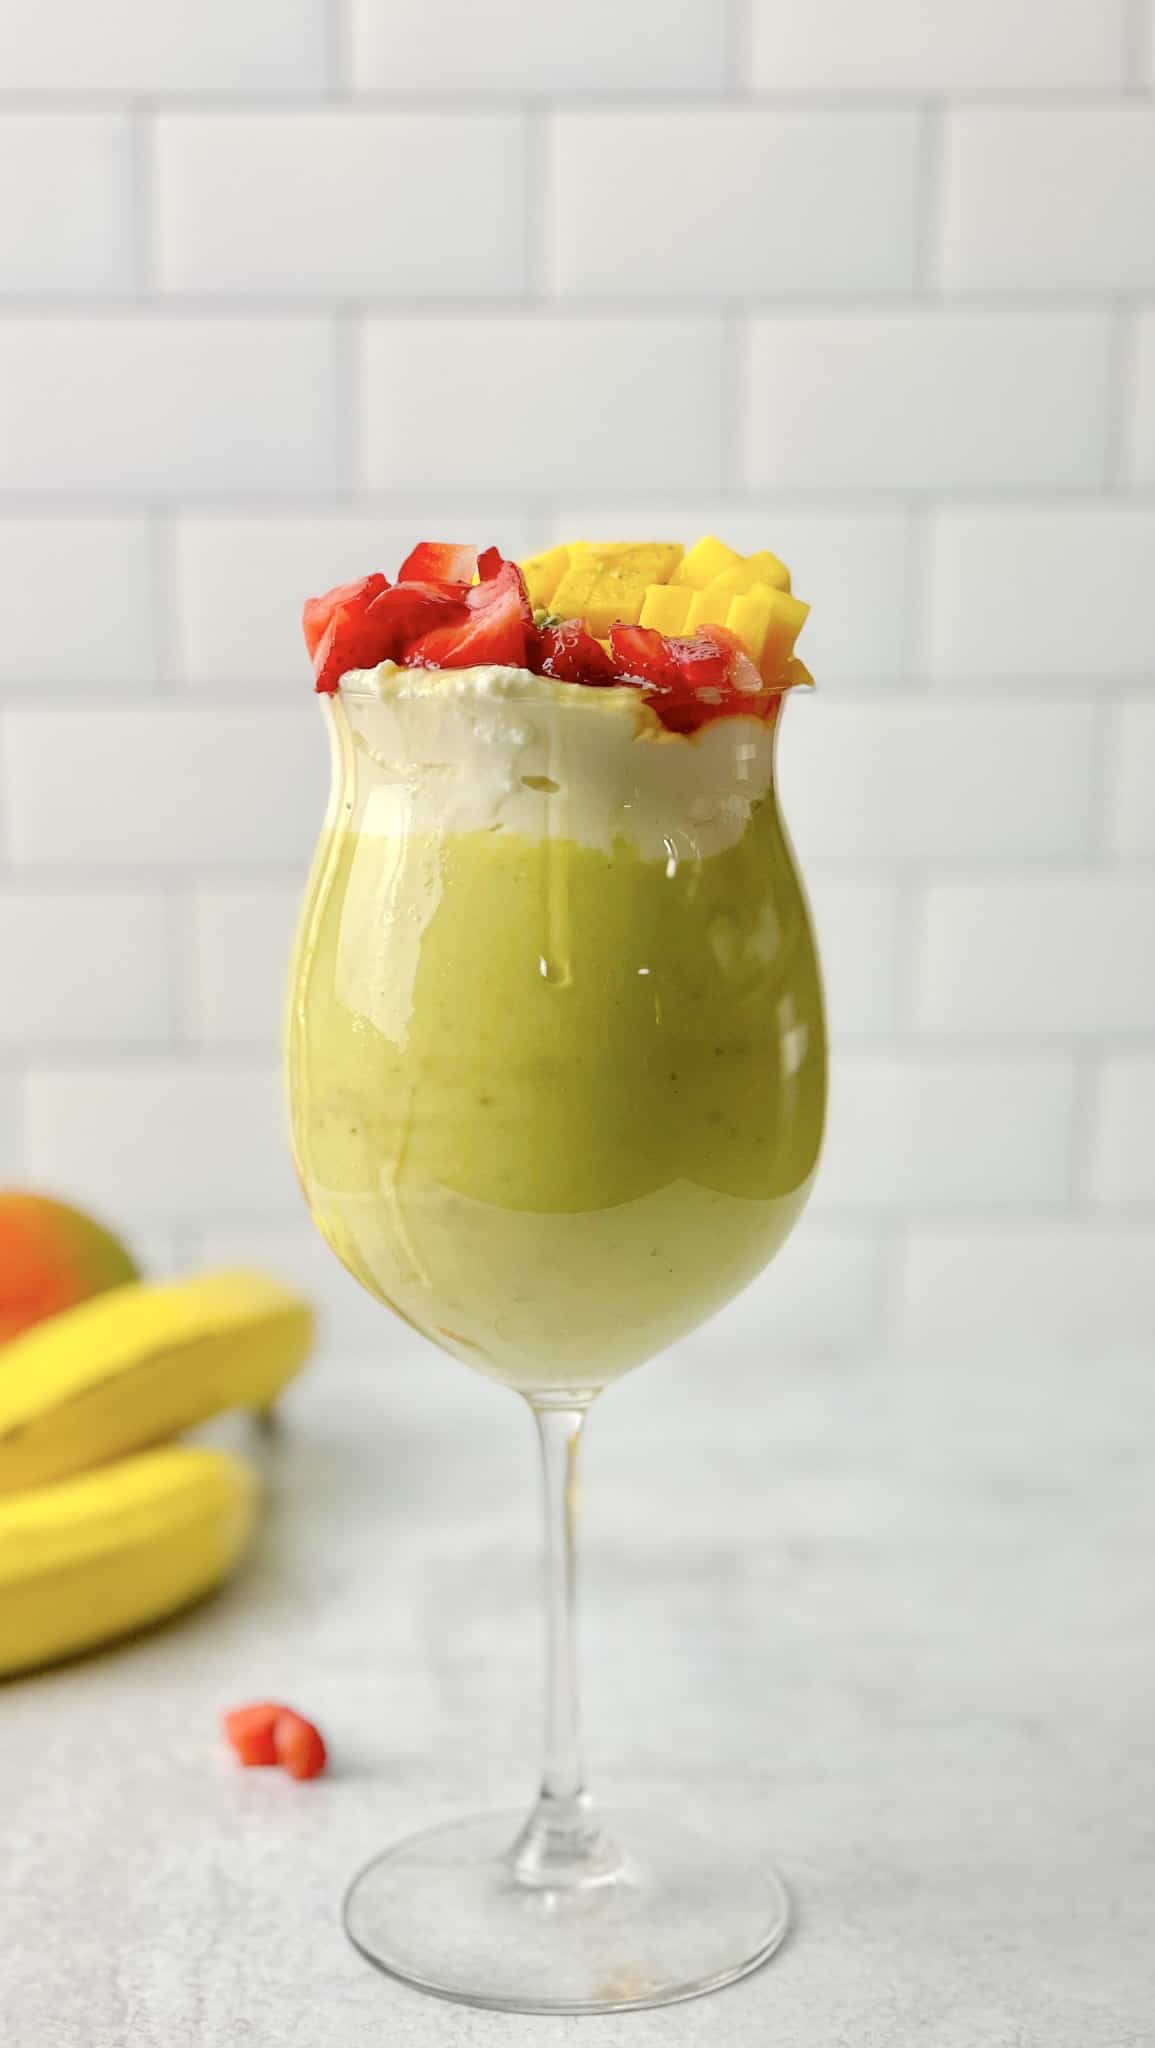 A nice cup of avocado smoothie topped with delicious fruits.